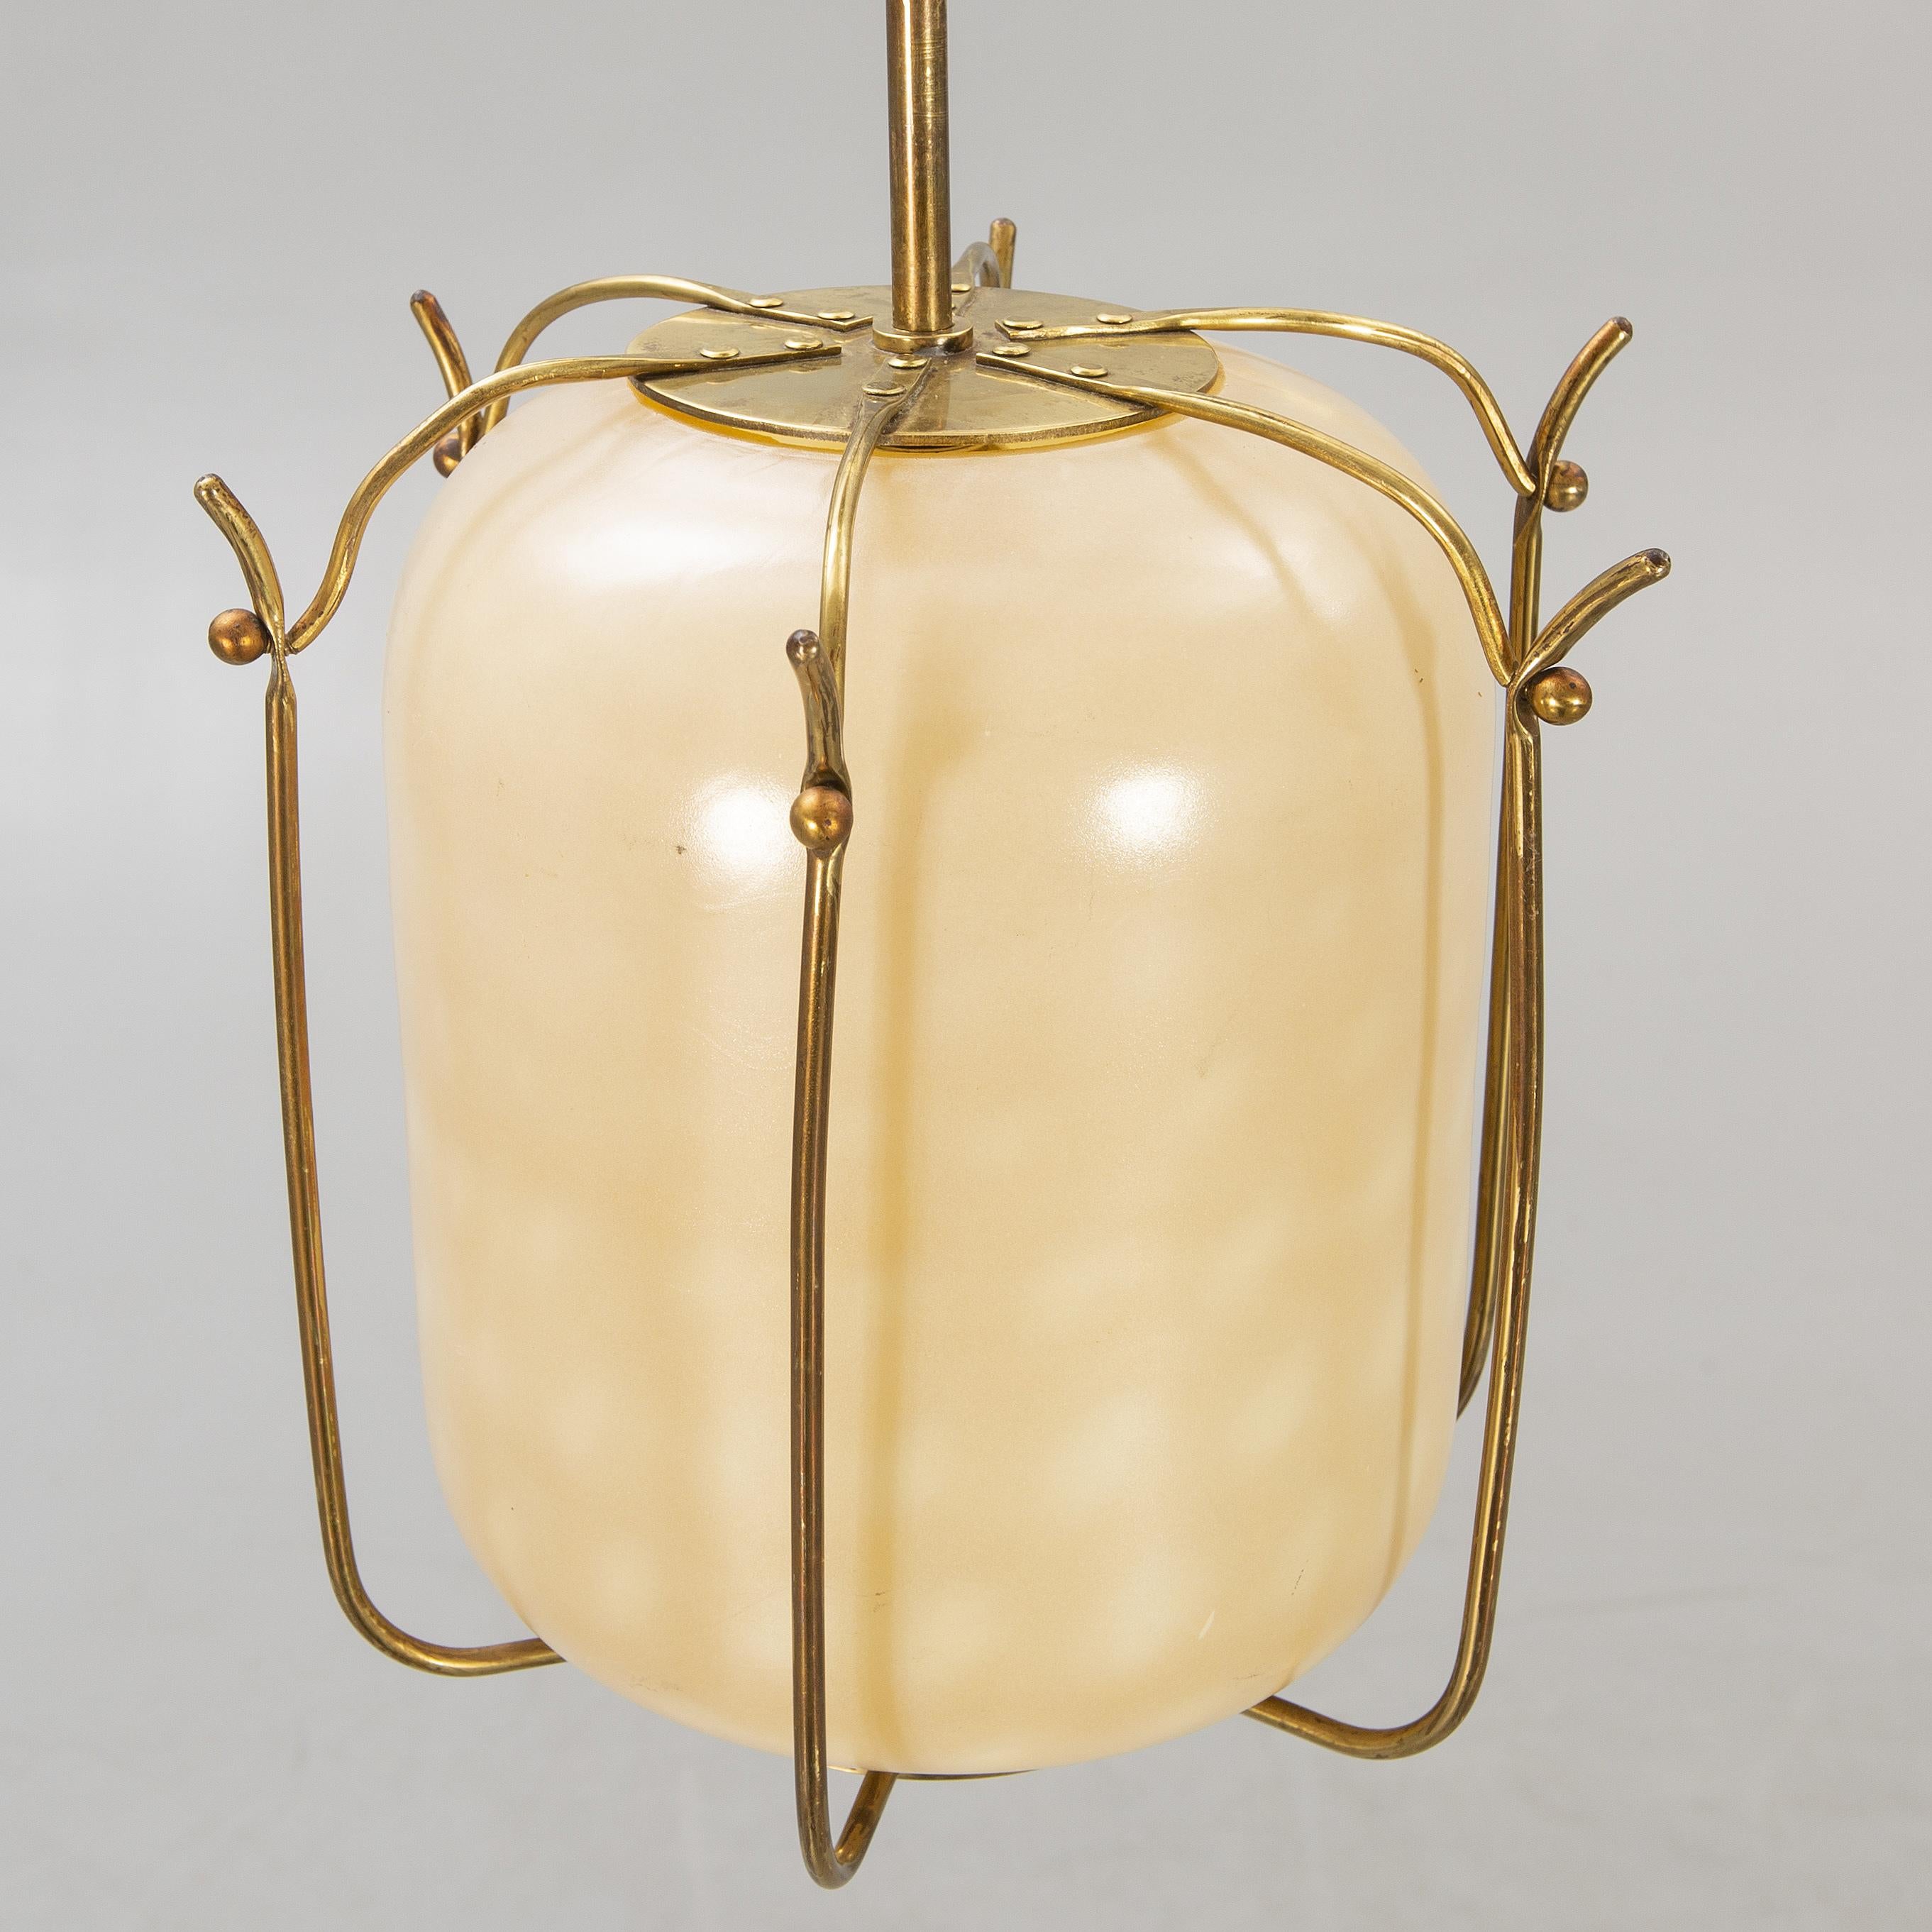 Unique pendant light anonymous work in the style of  James Mont glass and brass USA 1960
one of a kind pendant lamp, opalin glass and brass.
Good condition.